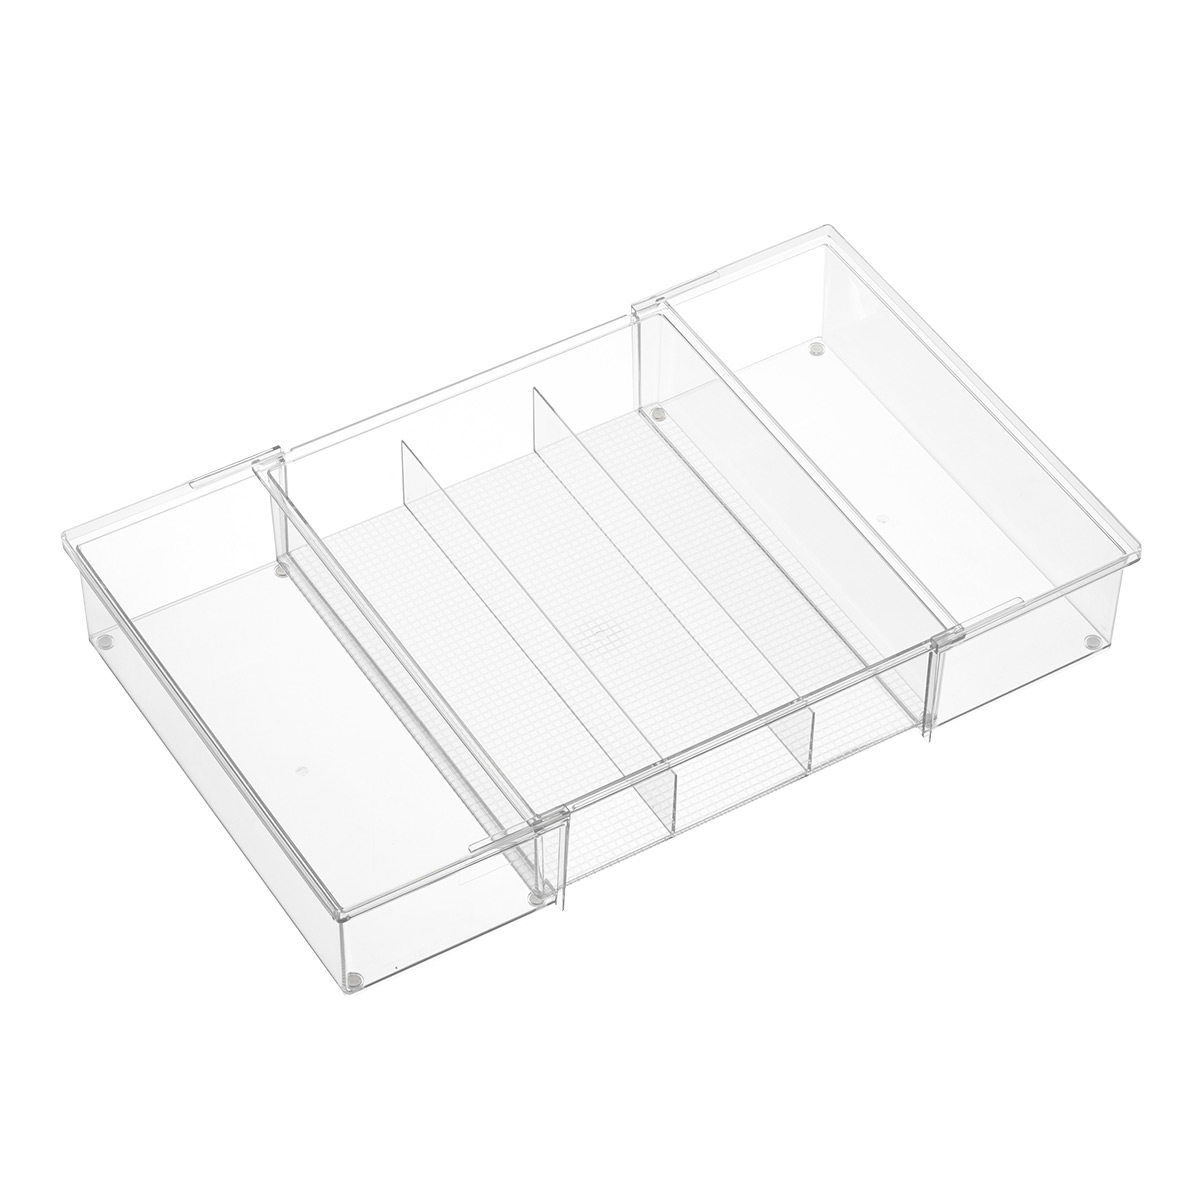 Everything Organizer Closet Drawer Organizers Collection | The ...